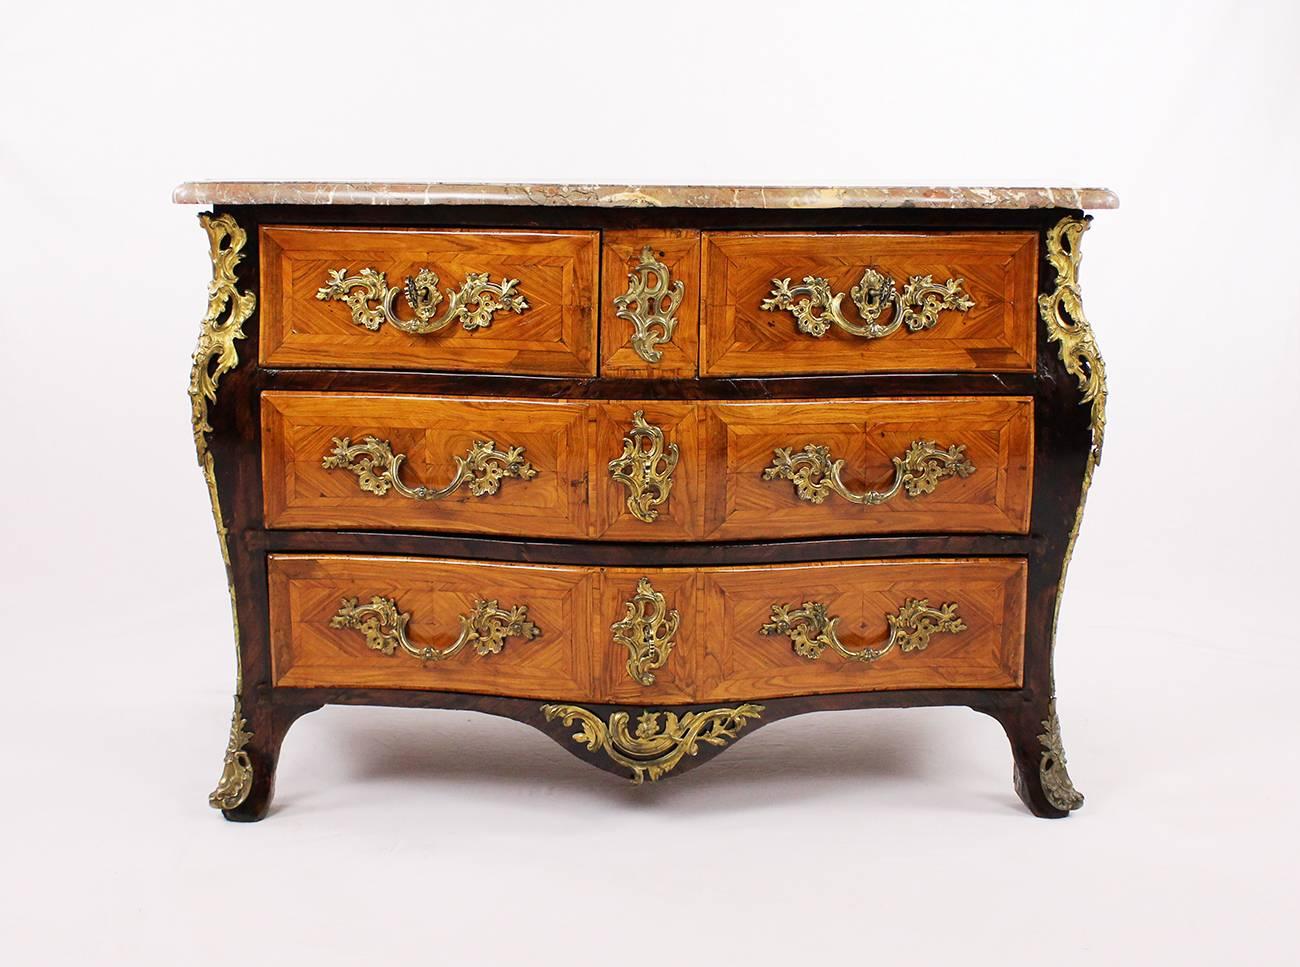 A stately chest of drawers from the late Baroque period from France, worked, circa 1750-1760 in rosewood, walnut and other fine woods. Finished with original reddish marble top, 4 drawers with original metal fittings. Belly corpus with molded edges,